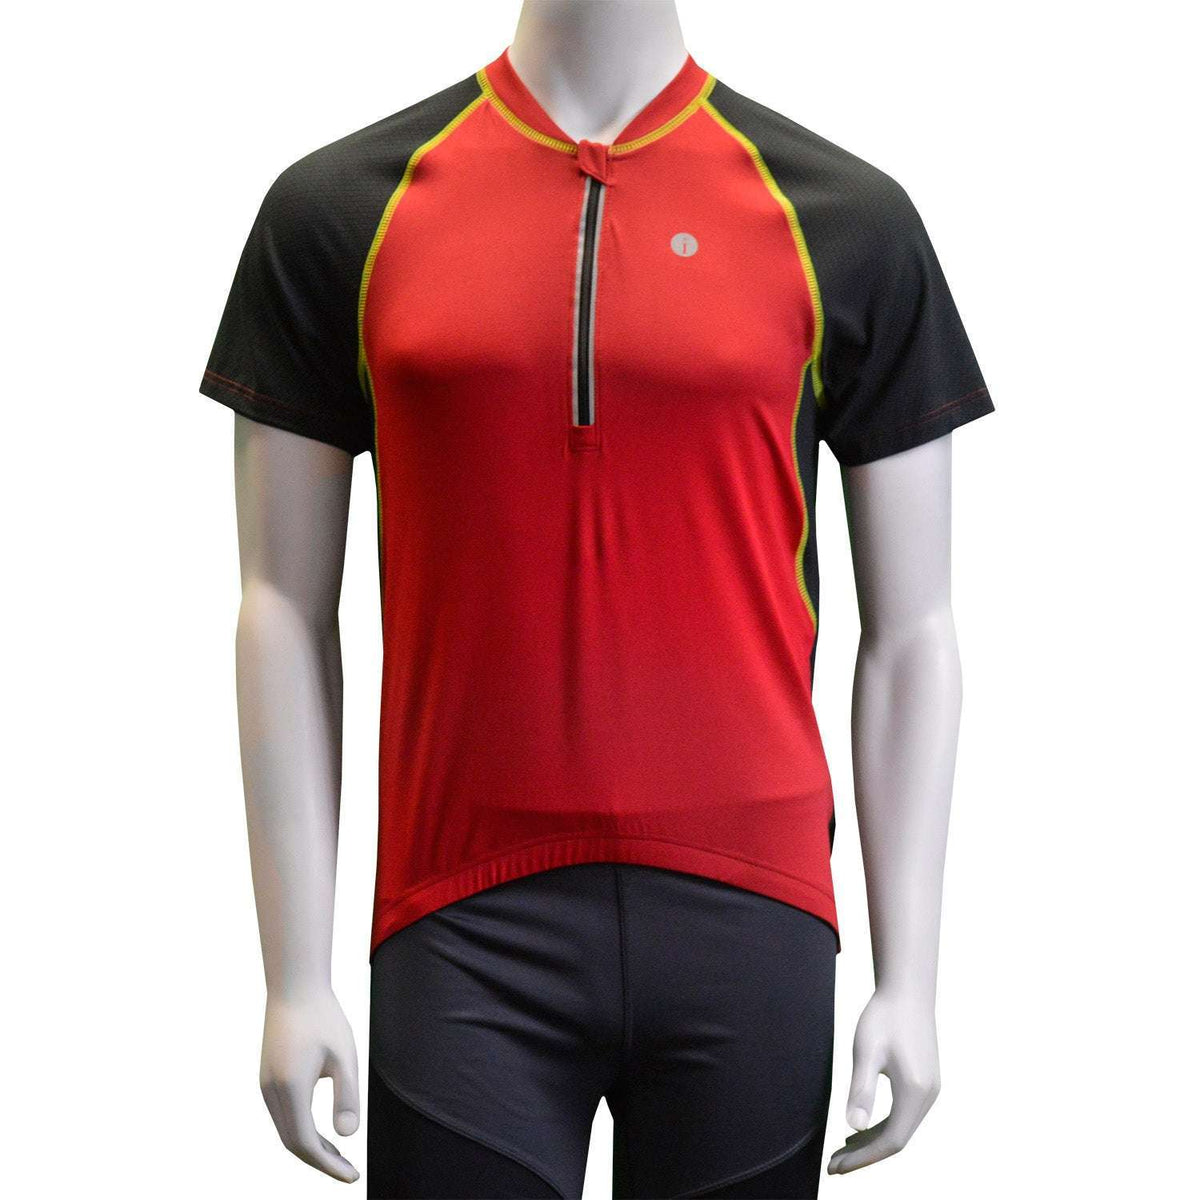 raceLITE Men's Reflective Cycling Jersey in Red / Black